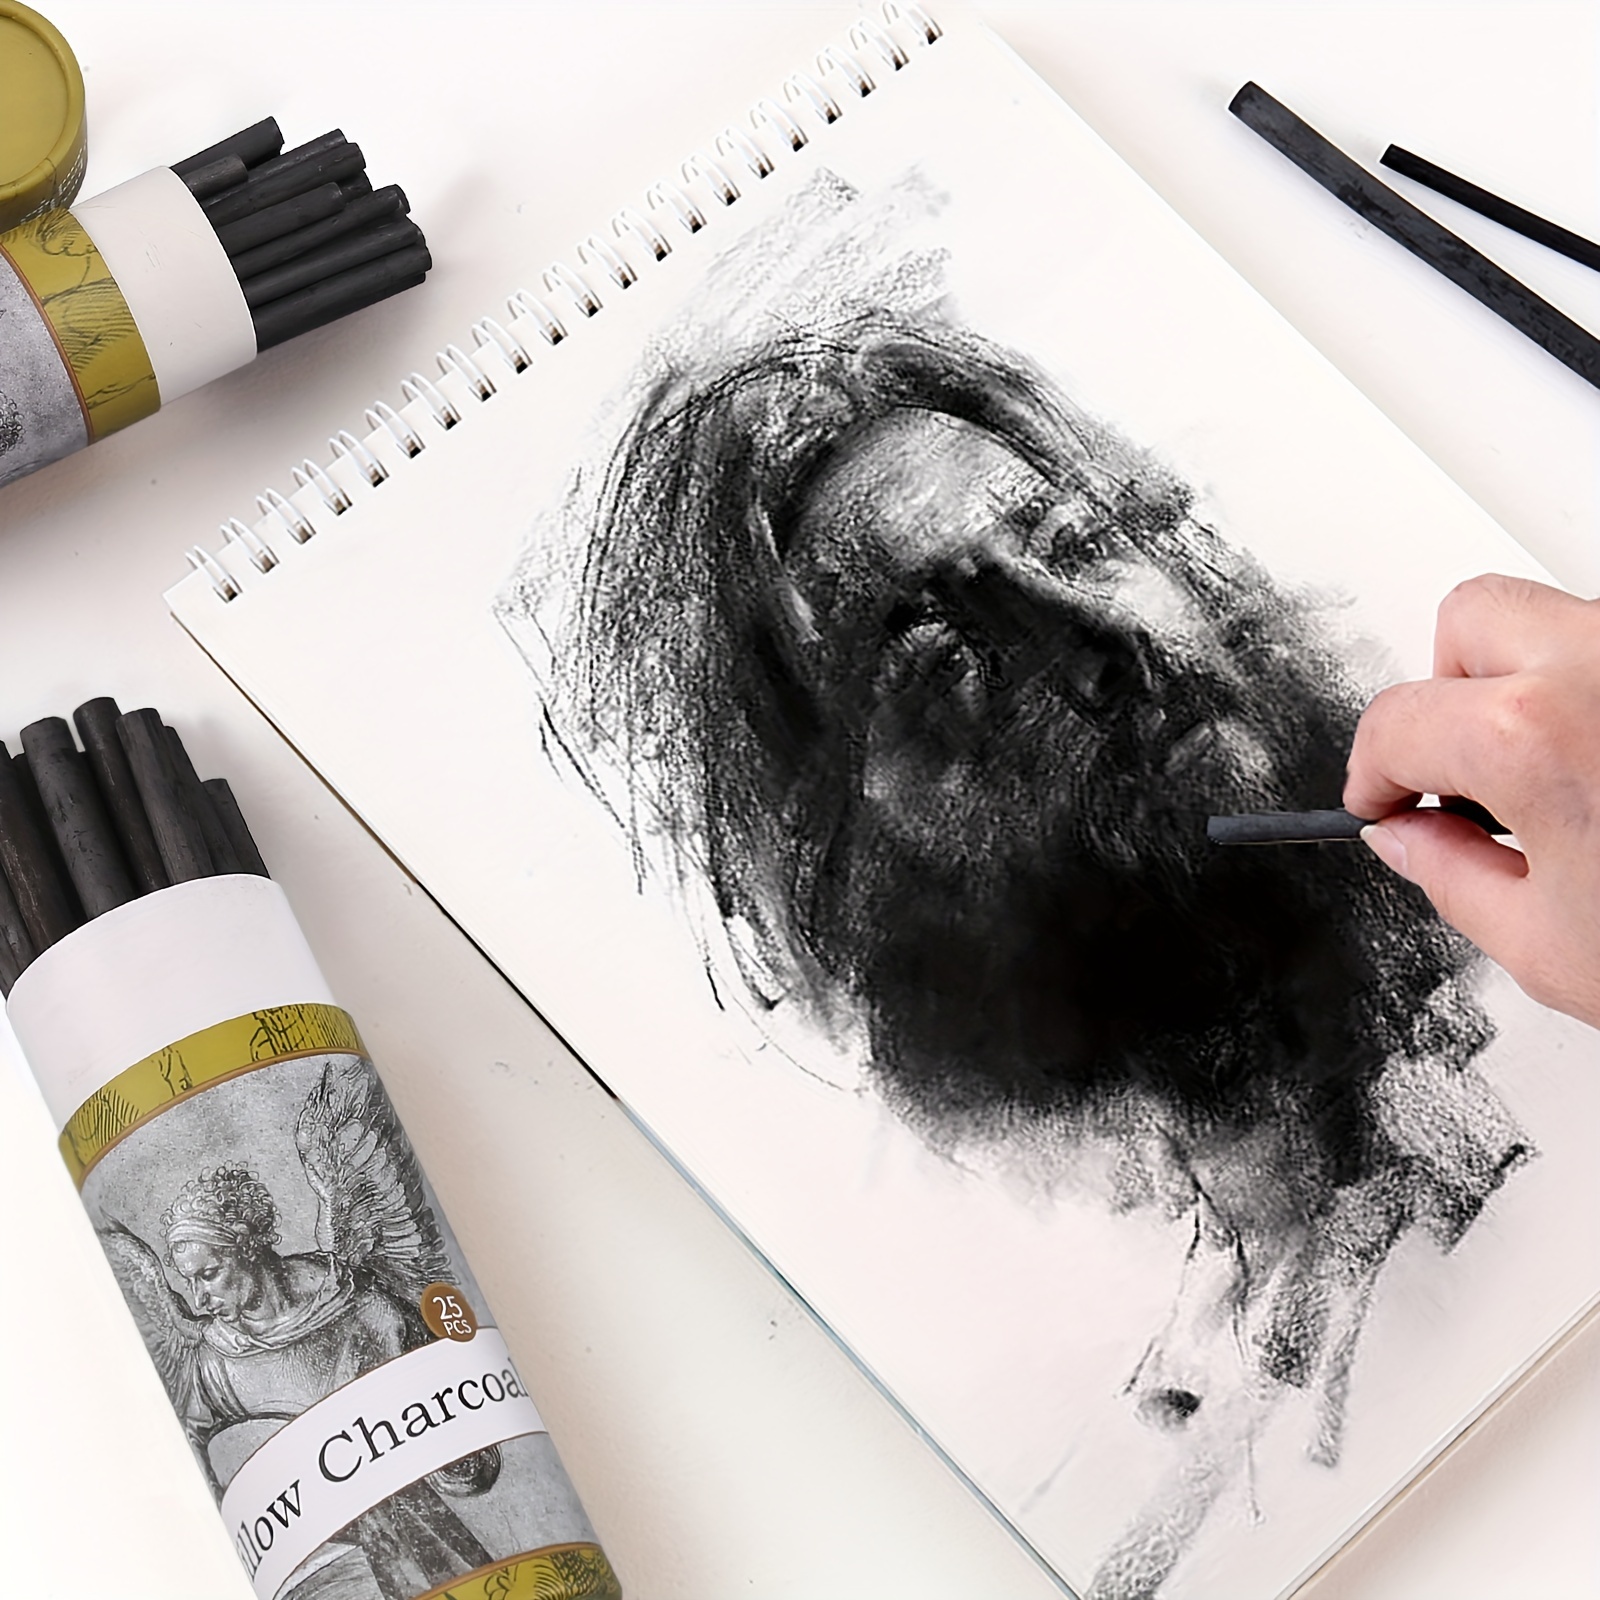 10pcs Vine Charcoal Sticks Willow Artist Soft Charcoal Pencil Sticks  Drawing Art Set in Tin Box 4 Sizes Charcoal Drawing Chalks Art Medium for  Sketching Drawing Shading